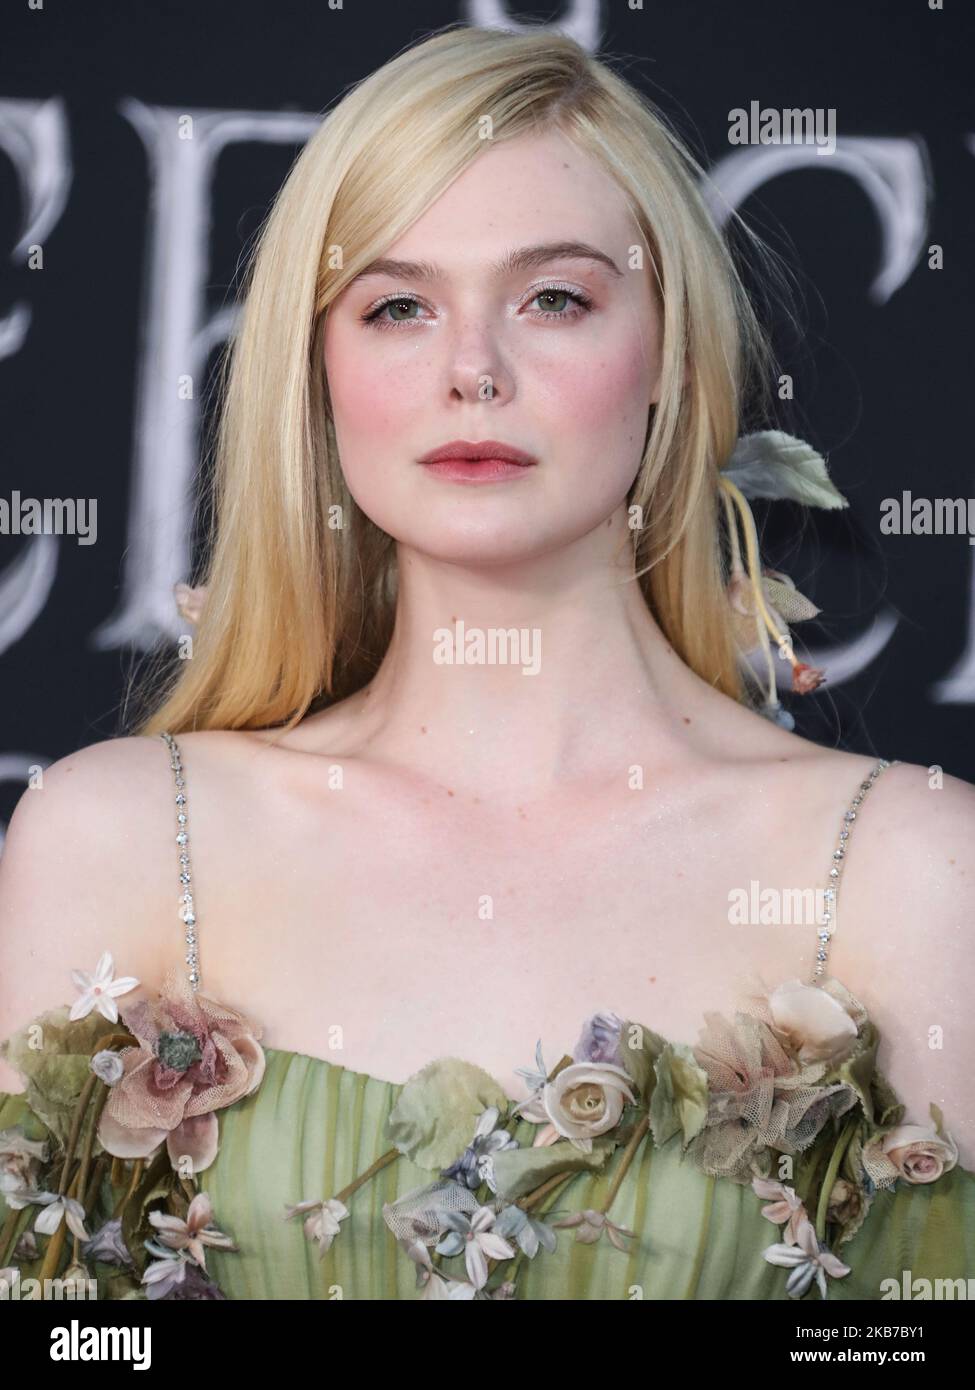 HOLLYWOOD, LOS ANGELES, CALIFORNIA, USA - SEPTEMBER 30: Actress Elle Fanning wearing Gucci arrives at the World Premiere Of Disney's 'Maleficent: Mistress Of Evil' held at the El Capitan Theatre on September 30, 2019 in Hollywood, Los Angeles, California, United States. (Photo by Xavier Collin/Image Press Agency/NurPhoto) Stock Photo